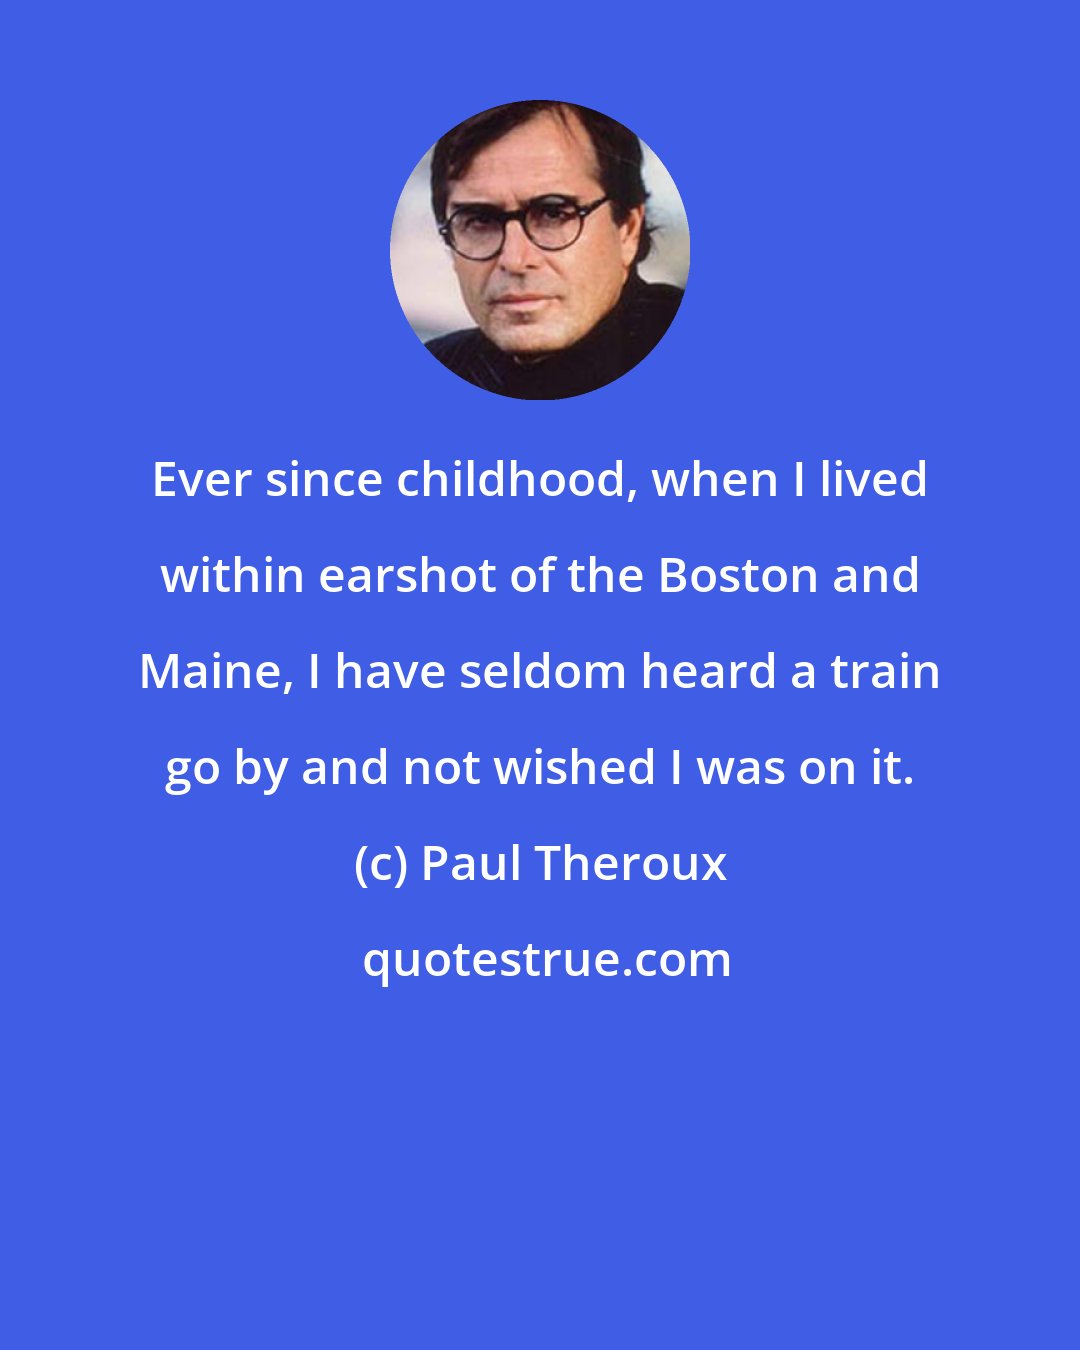 Paul Theroux: Ever since childhood, when I lived within earshot of the Boston and Maine, I have seldom heard a train go by and not wished I was on it.